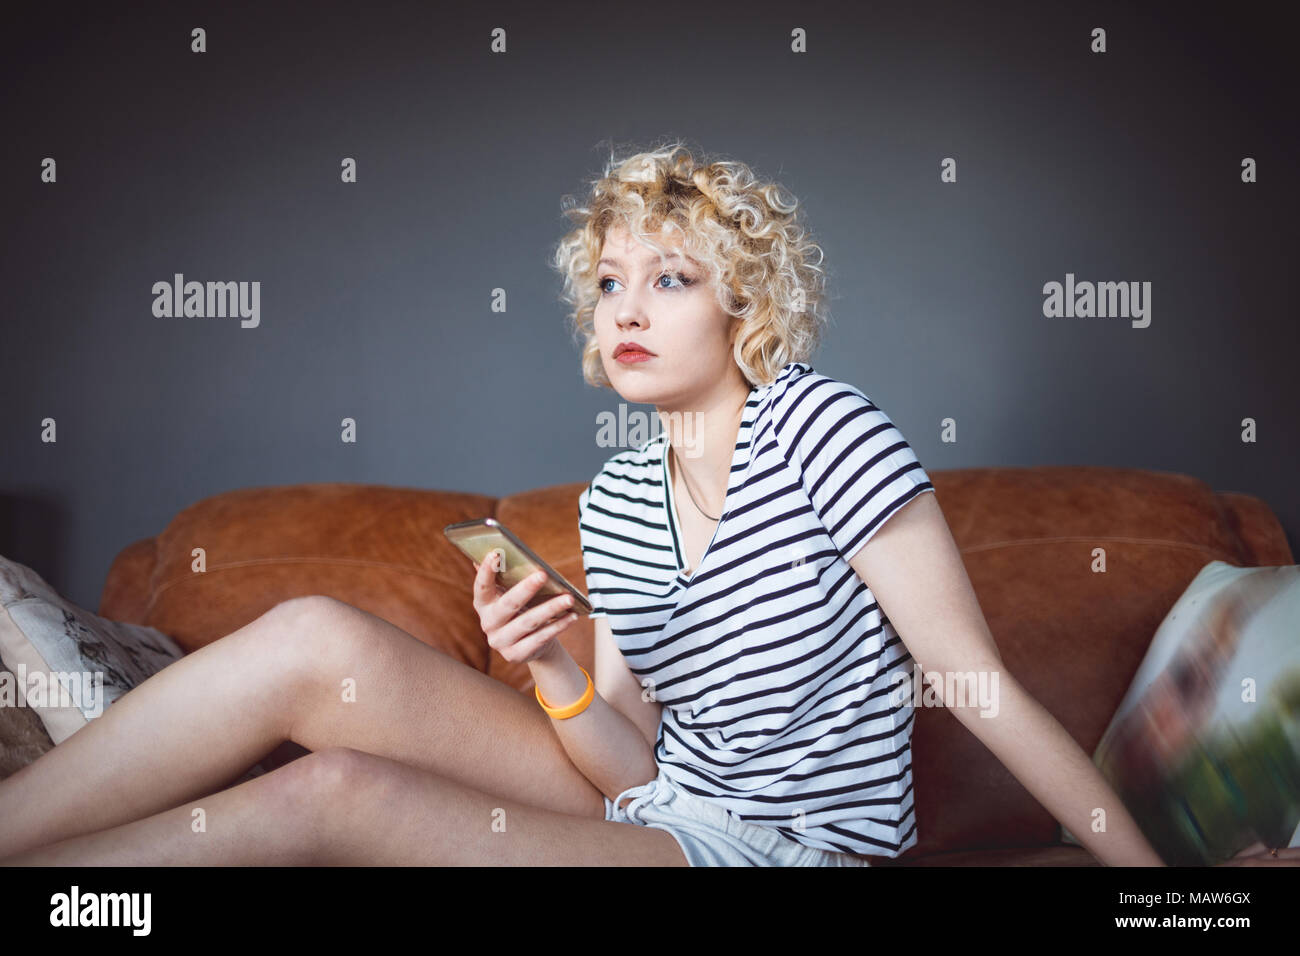 Woman using mobile phone in living room Banque D'Images